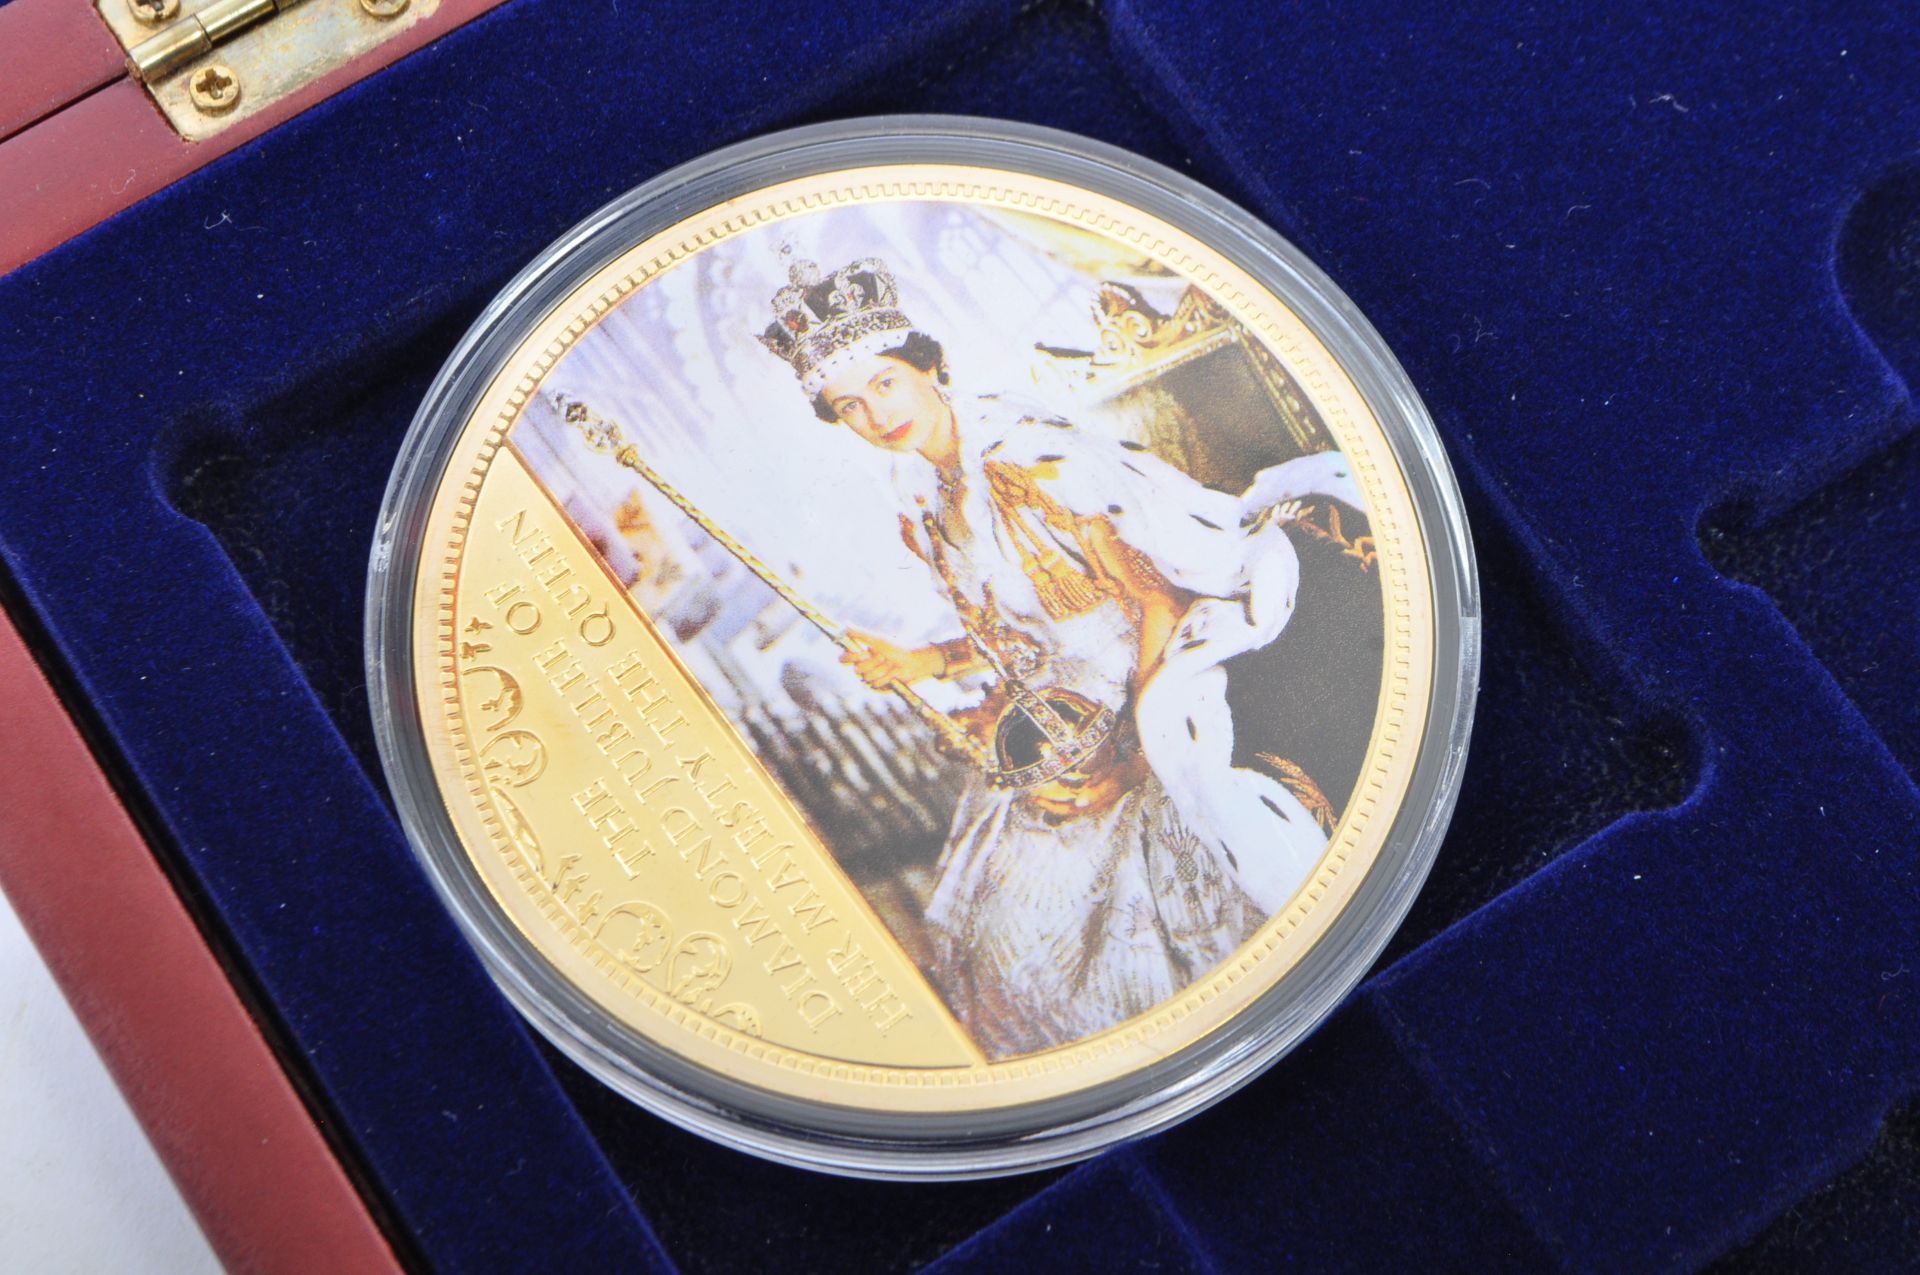 THE QUEEN DIAMOND JUBILEE GIFT PACK OF COMMEMORATIVE COINS - Image 2 of 6